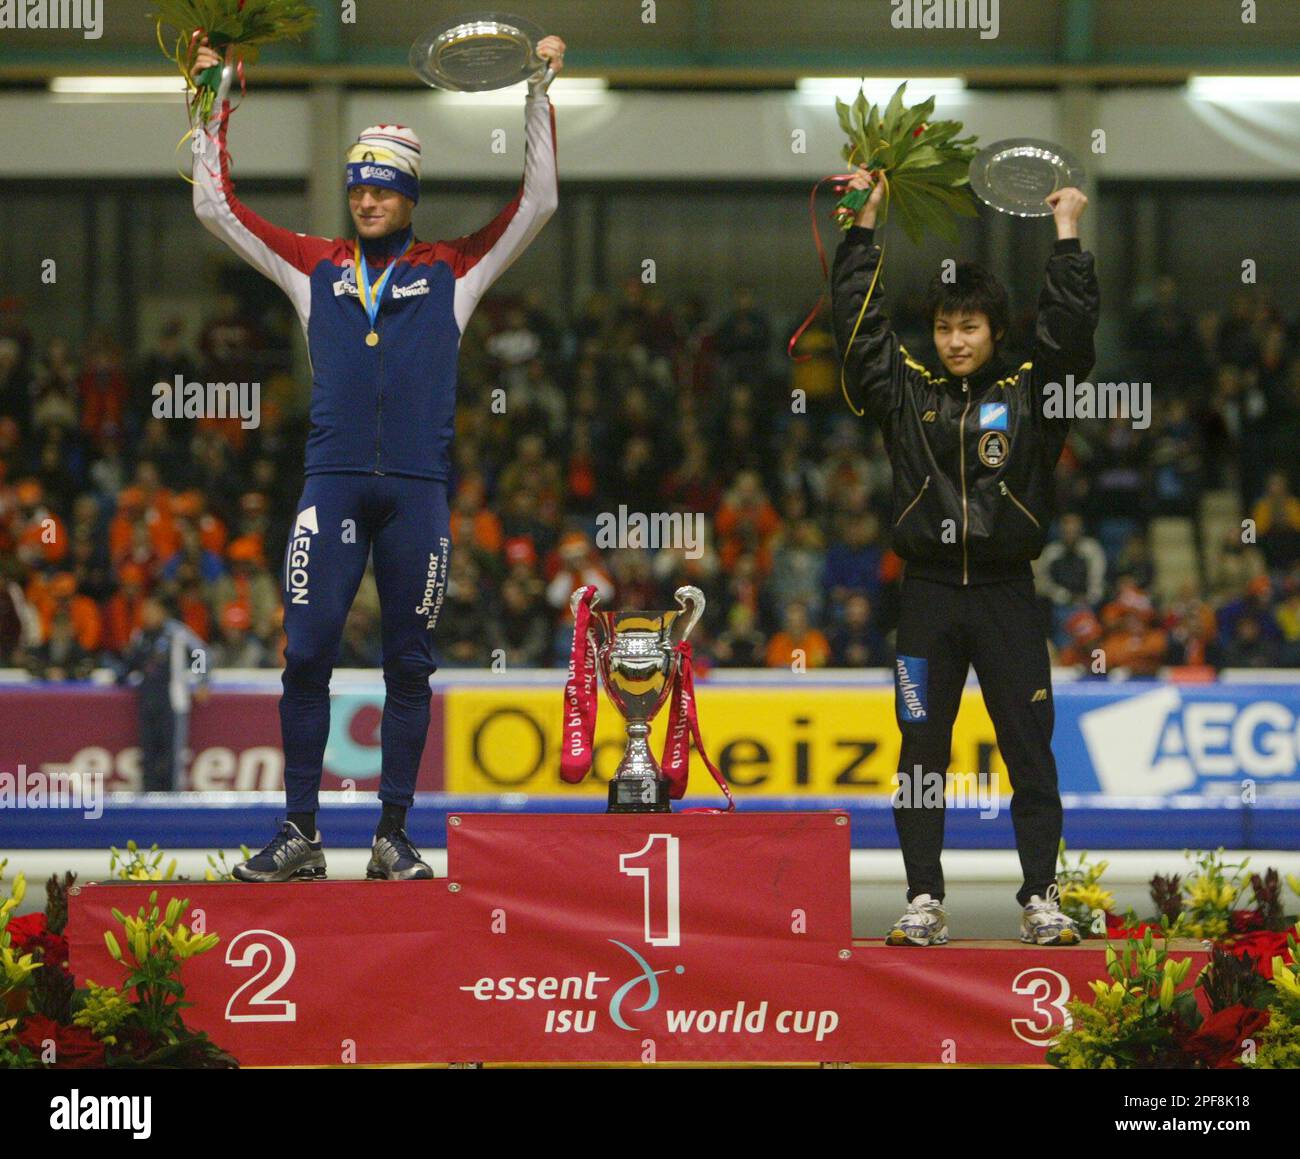 Japan's Joji Kato, right, third place, and Holland's Erben Wennemars,  second place, stand on the winners podium next to the empty overall winner  stand for the 500 meters World Cup at the